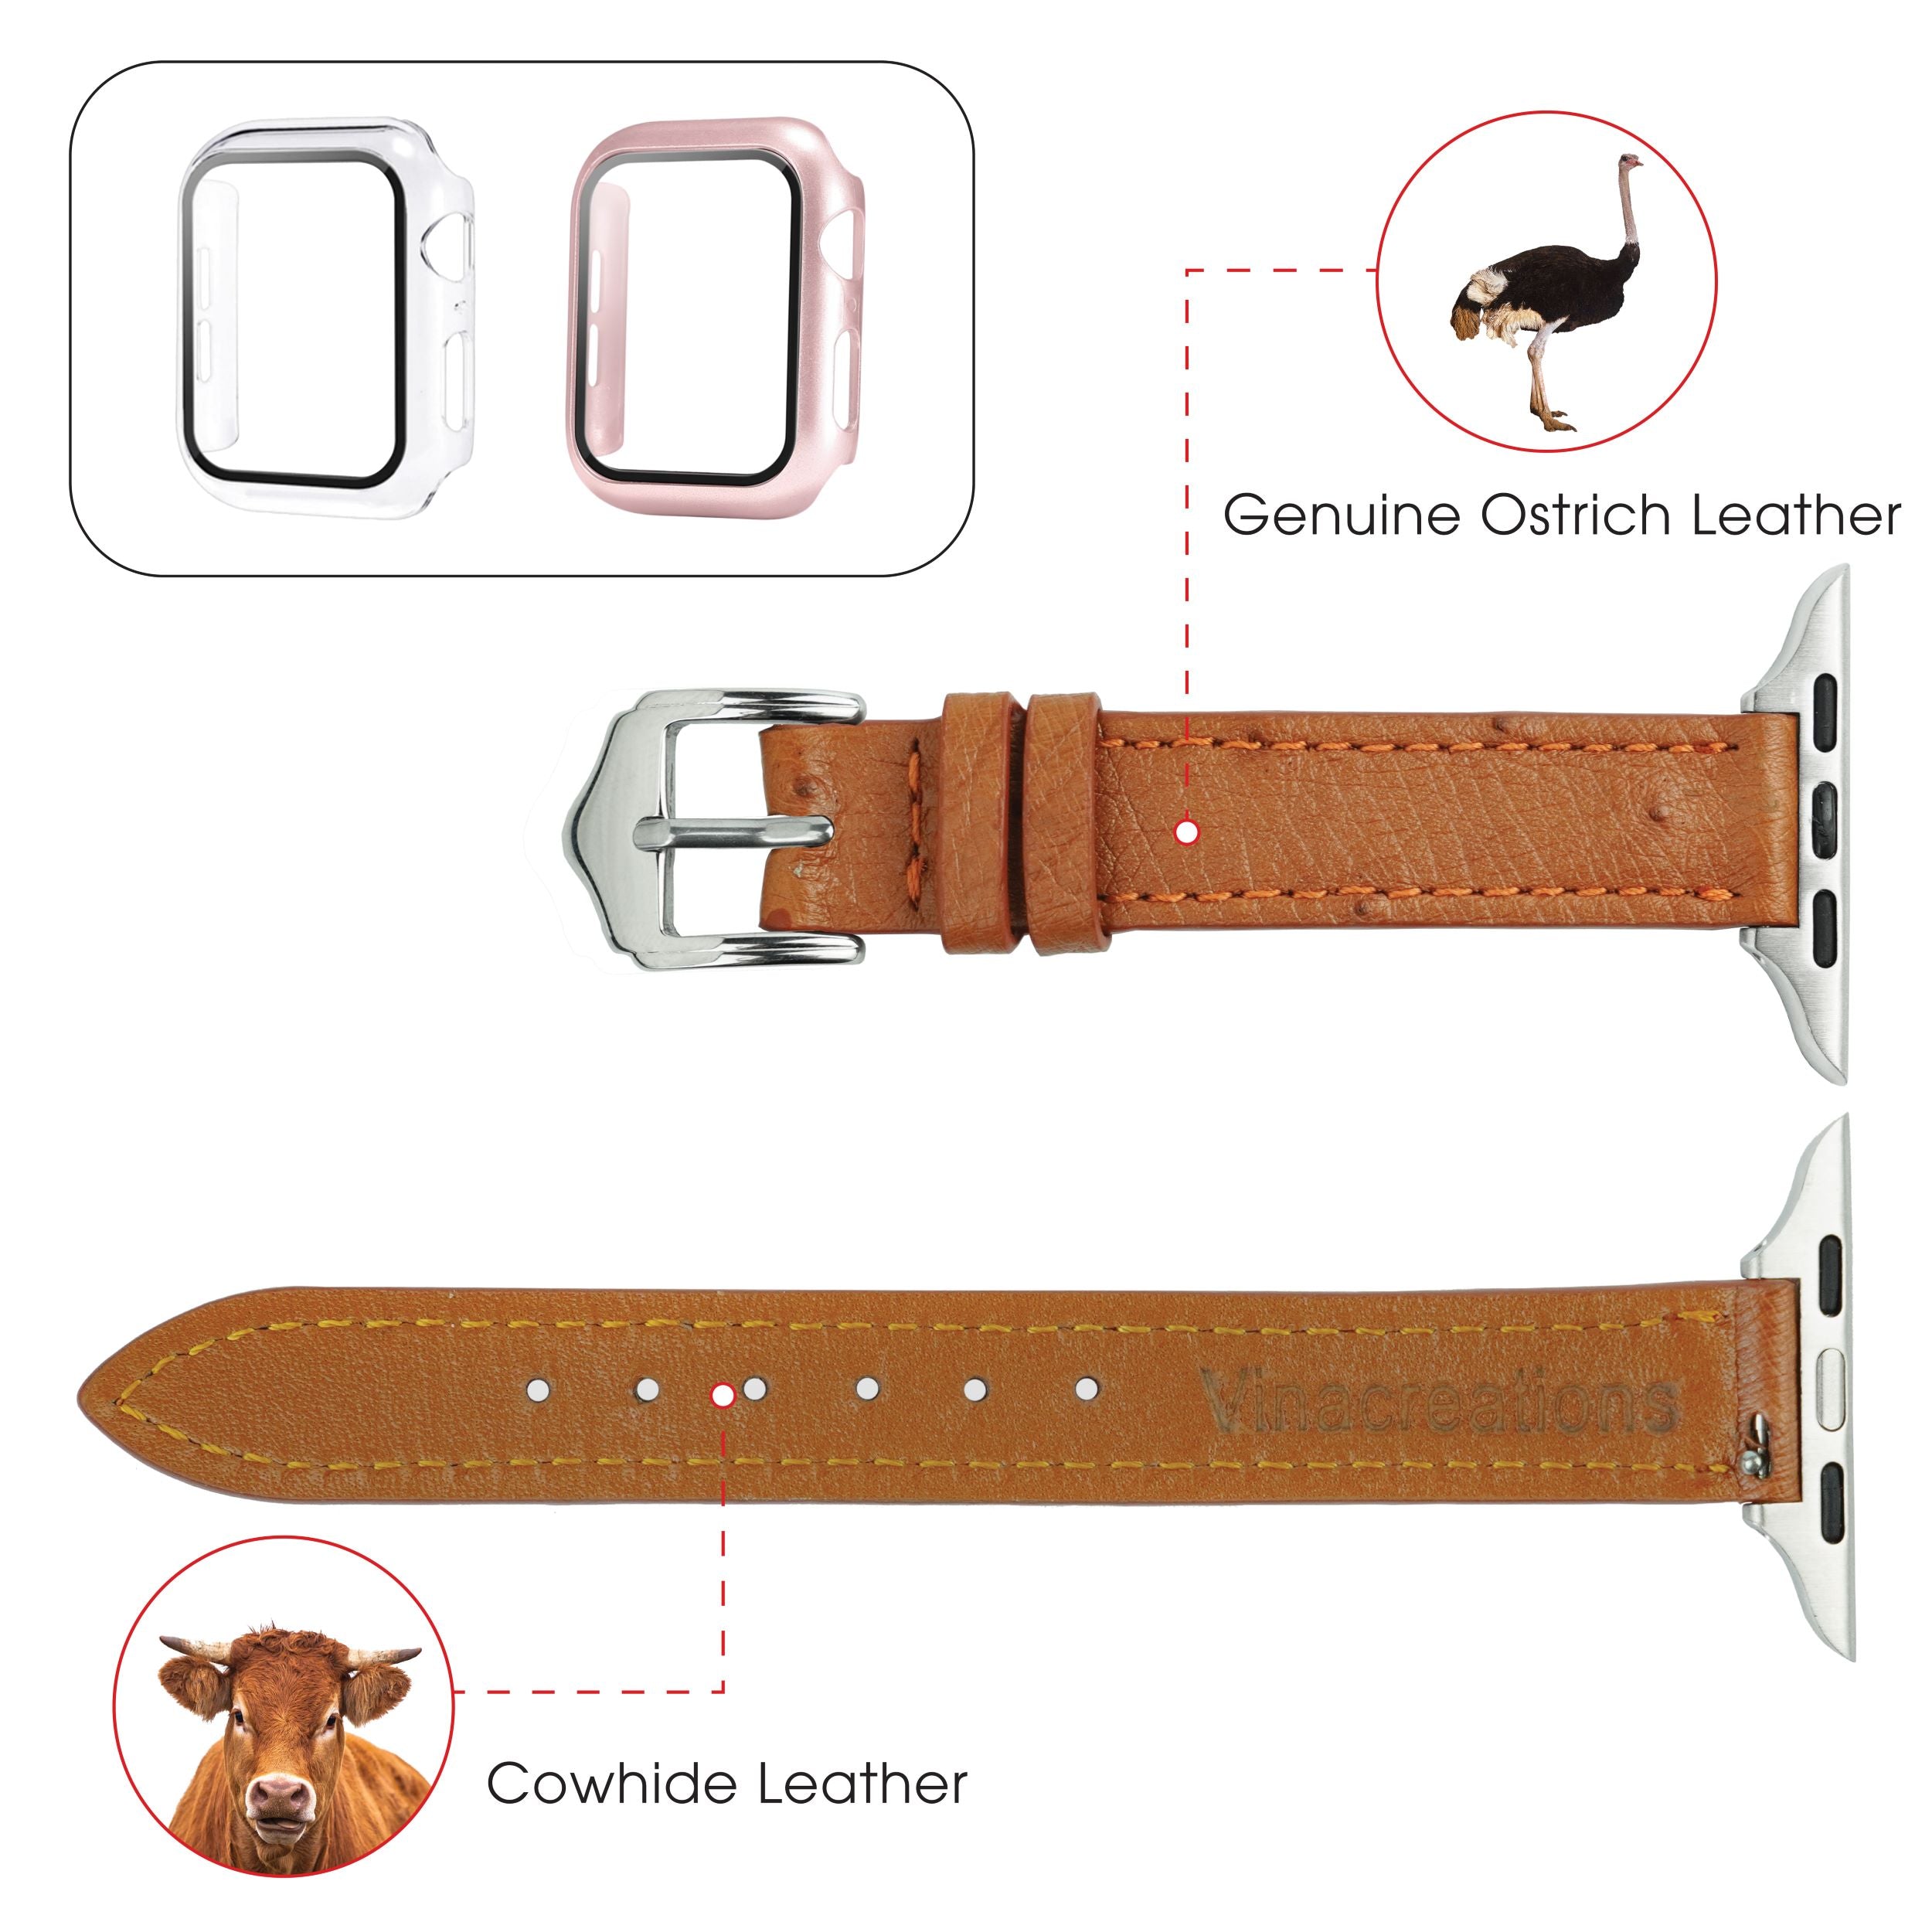 Light Brown Flat Ostrich Leather Band Compatible Apple Watch Iwatch 38mm Screen Protector Case Silver Adapter Replacement Strap For Smartwatch Series 1 2 3 Leather Handmade AW-186S-W-38MM